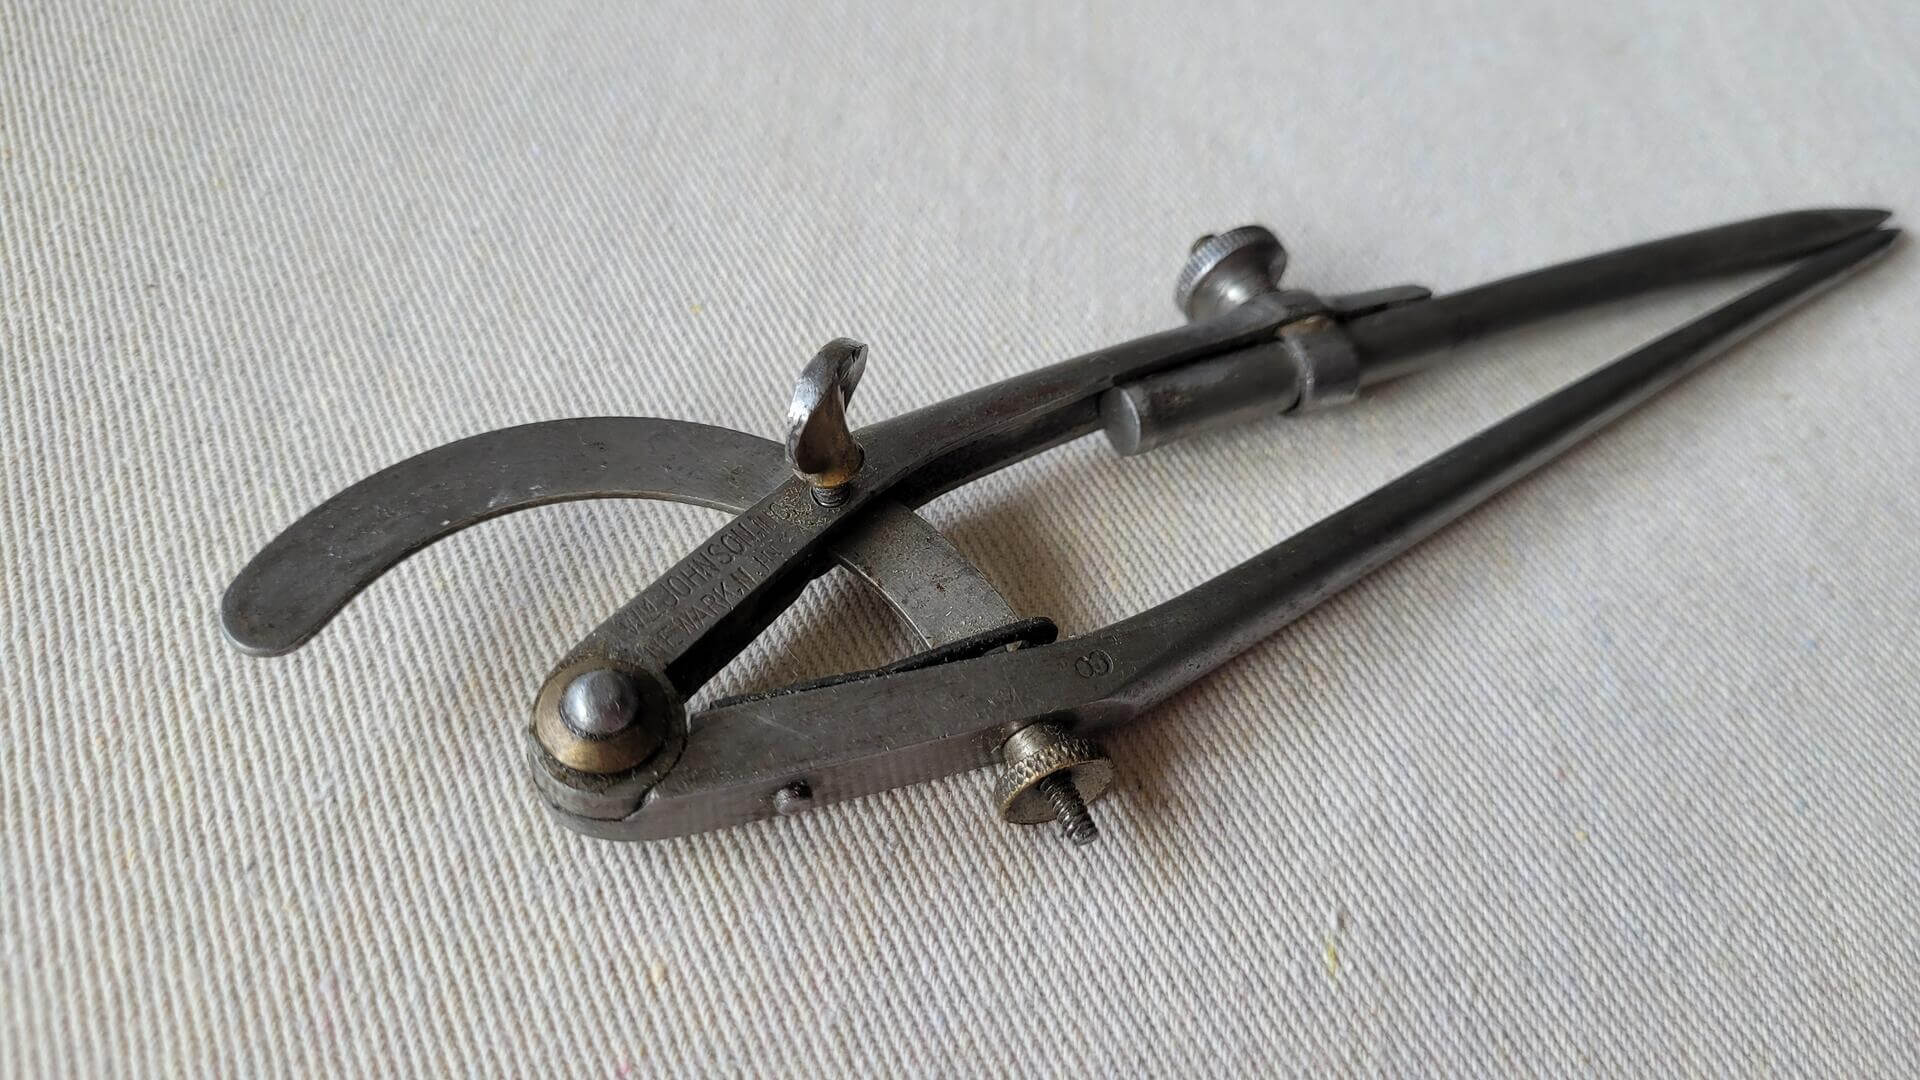 Vintage William Johnson adjustable wing divider caliper w brass hinges 8 " Antique made in USA Newark NJ collectible carpenter's & machinist compass scribe